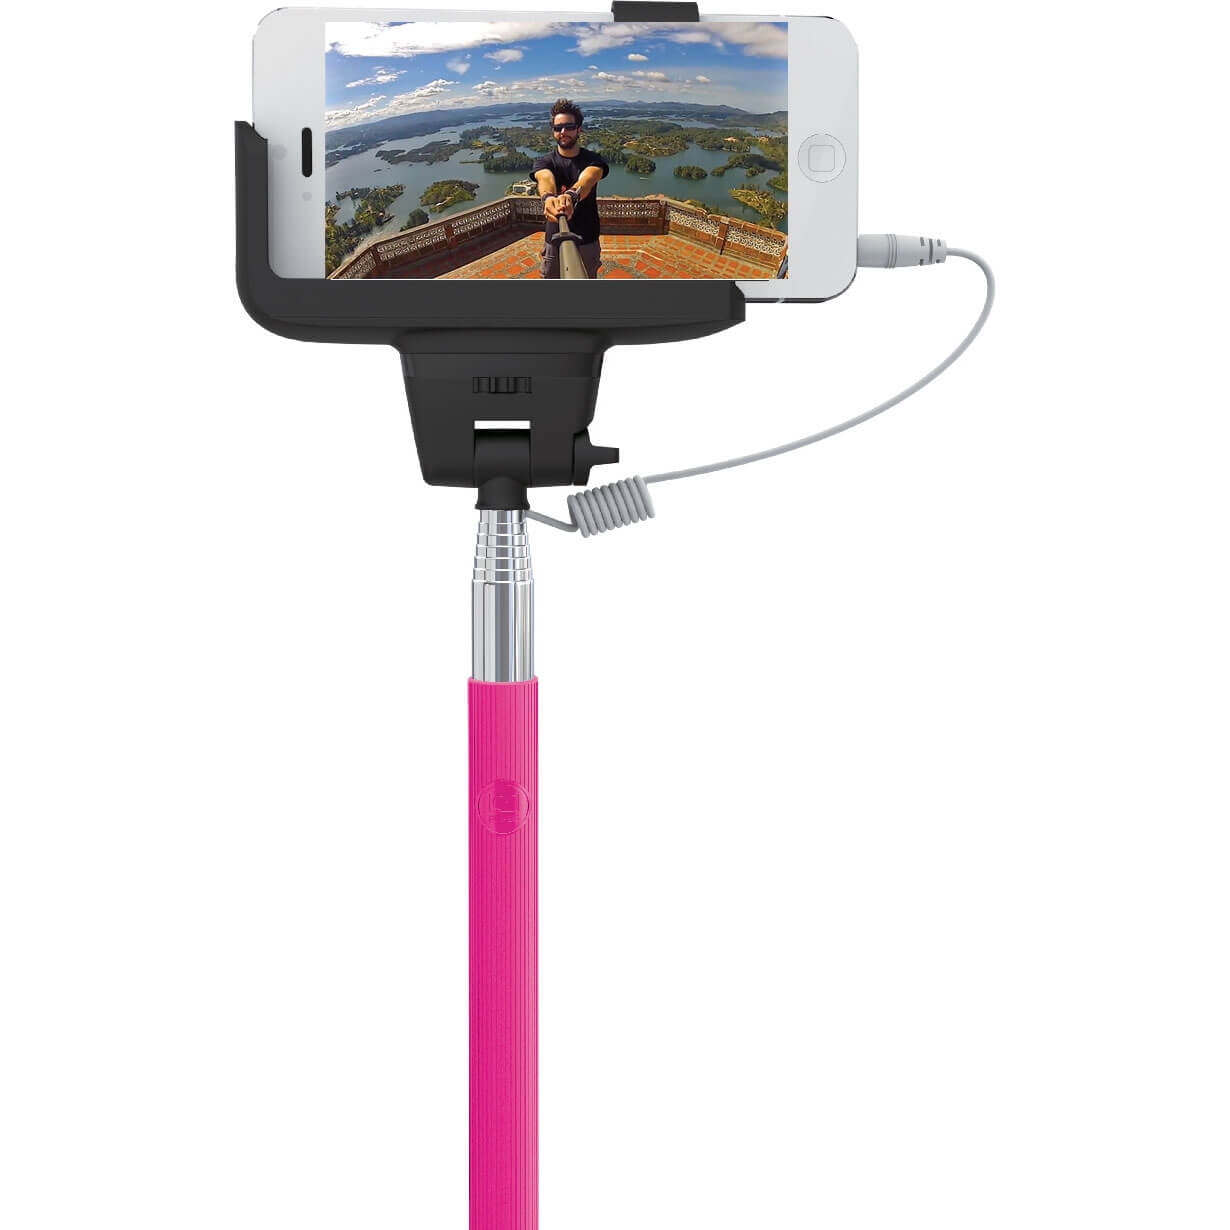 Hype selfie stick review